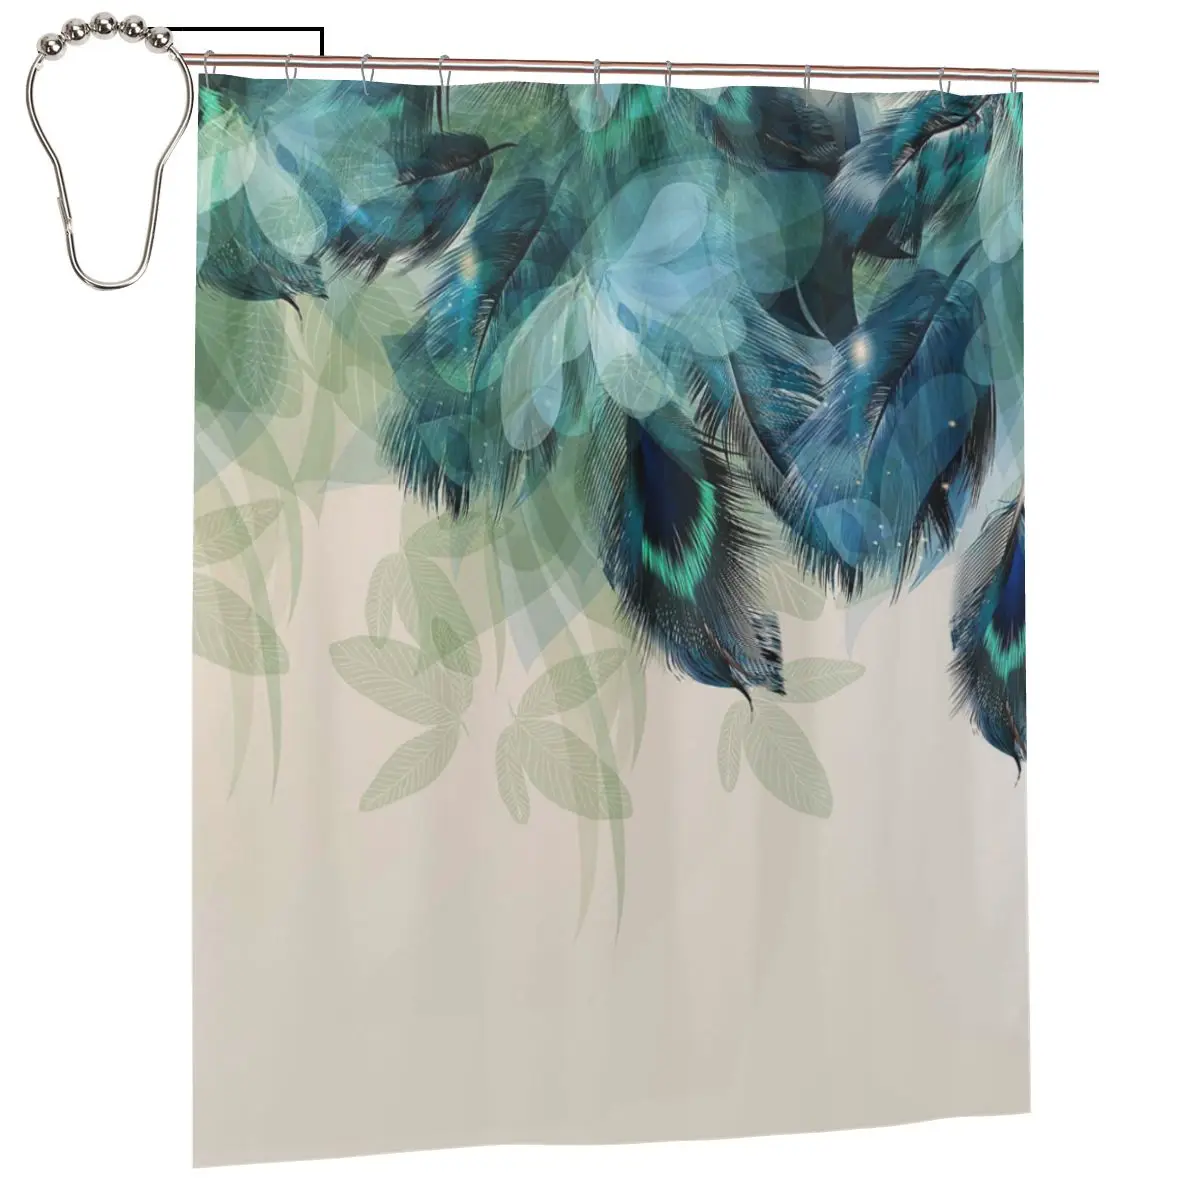 

Peacock Feather Shower Curtain for Bathroon Personalized Funny Bath Curtain Set with Iron Hooks Home Decor Gift 60x72in